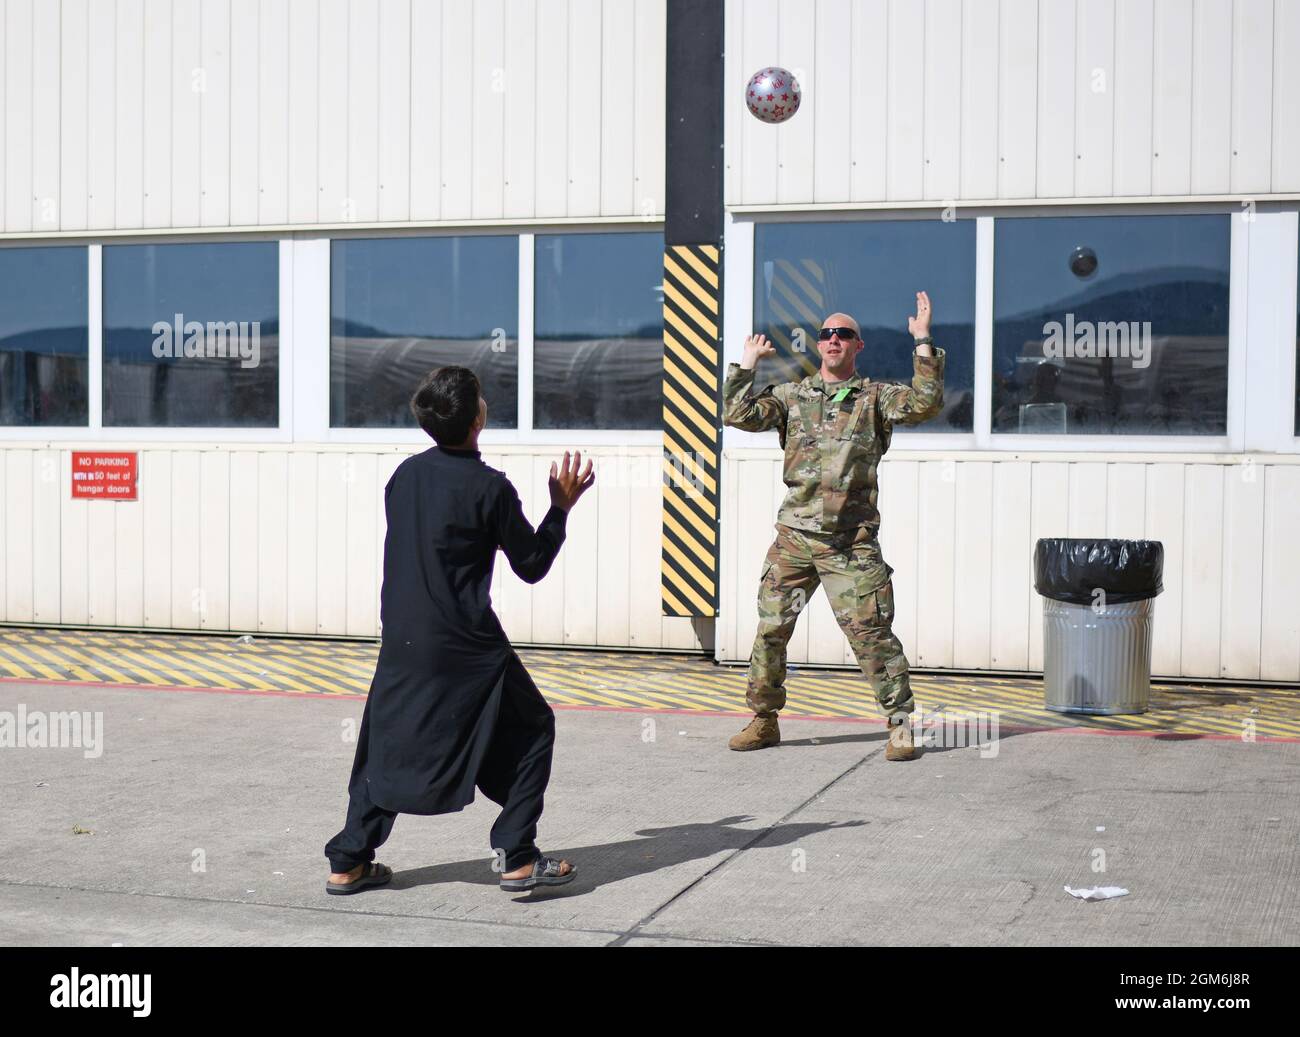 An Airman plays ball with an evacuee at Ramstein Air Base, Germany, Sept. 8, 2021. RAB welcomed approximately 16,800 evacuees making it one of the largest, most complex humanitarian operations in history. (U.S. Air Force photo by Tech. Sgt. Crystal L. Charriere) Stock Photo